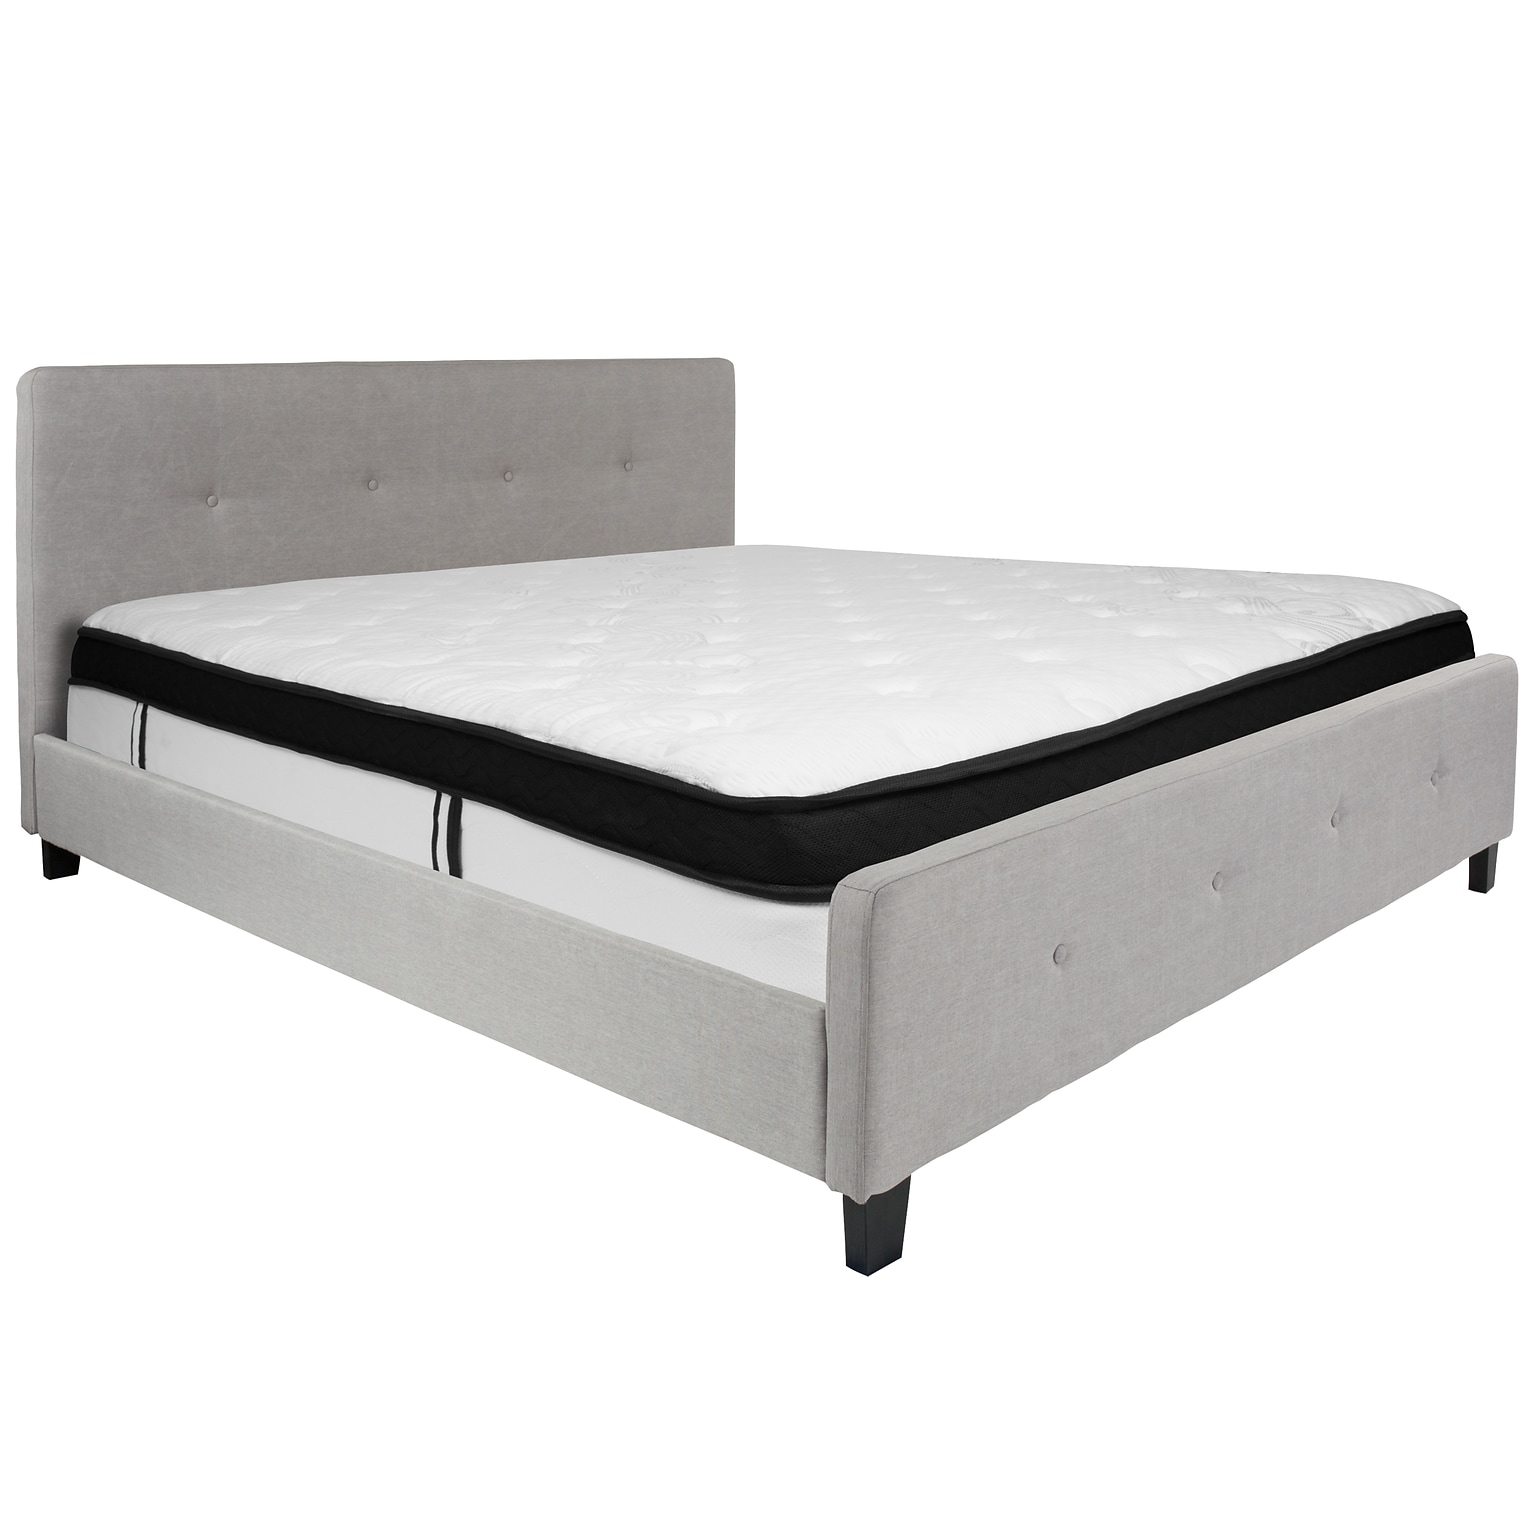 Flash Furniture Tribeca Tufted Upholstered Platform Bed in Light Gray Fabric with Memory Foam Mattress, King (HGBMF28)